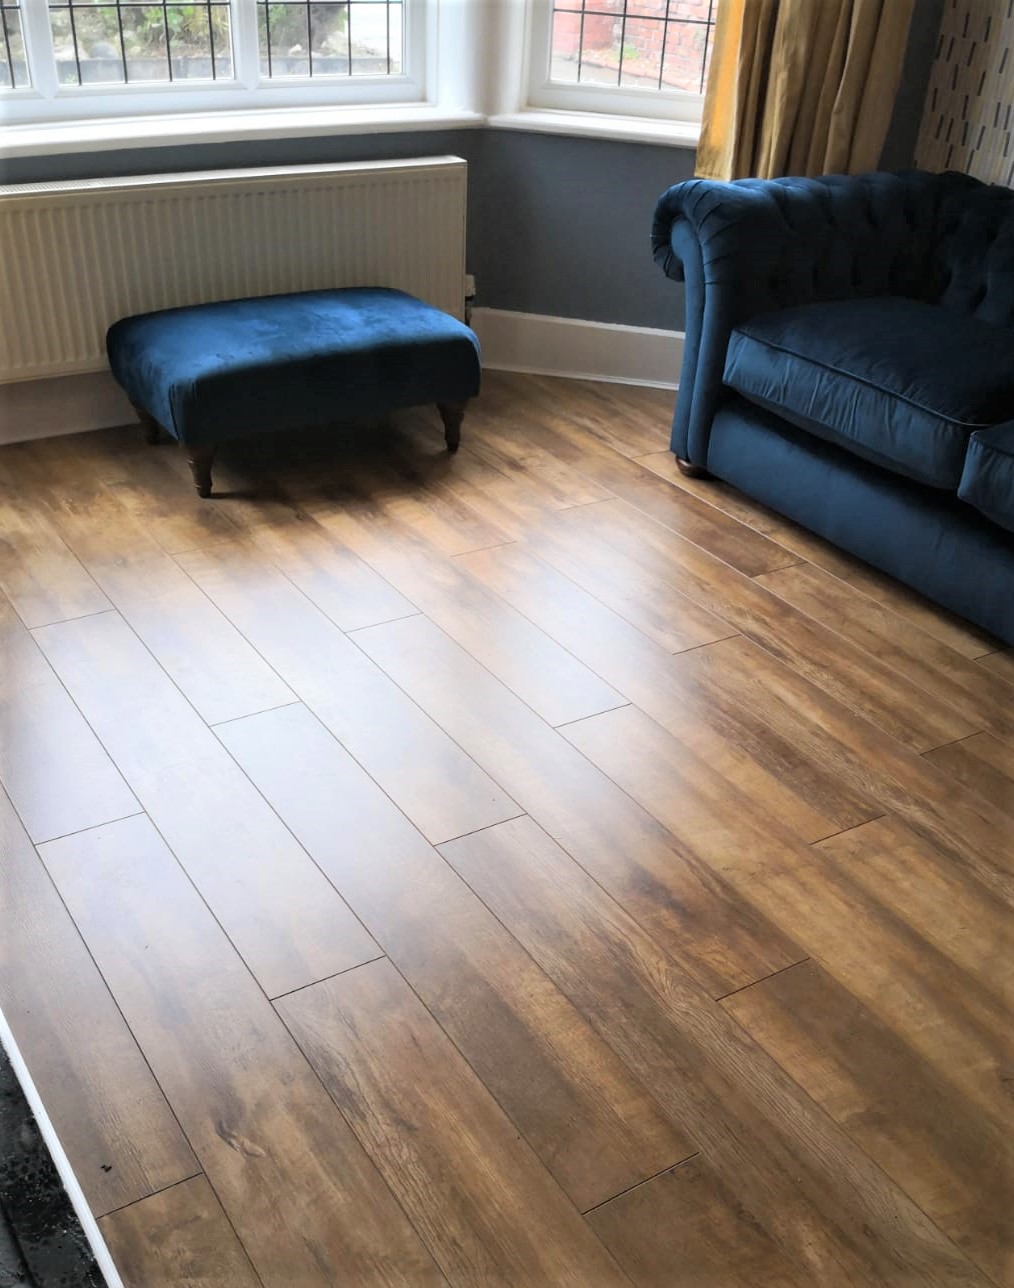 Lifestyle Floors Chelsea Country Oak Laminate Floor Installation The Carpet Shop at the Mews